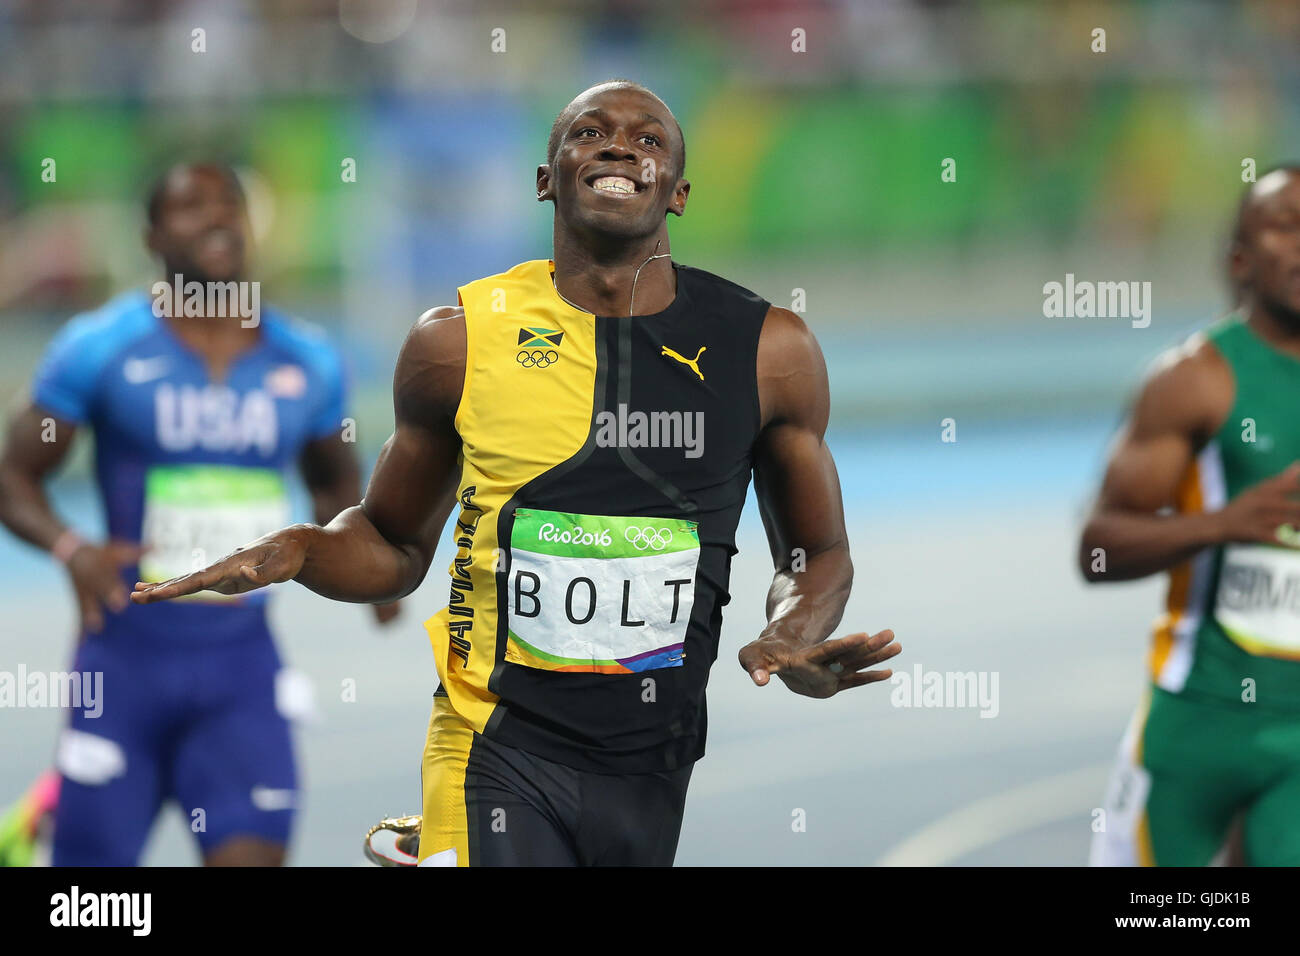 Rio De Janeiro, Brazil. 14th Aug, 2016. Jamaican athlete USAIN BOLT wins the men's 100m dash of the Rio 2016 Olympic Games at the Olympic Stadium. Bolt won the 100 meters in 9.81 seconds, securing his place as the greatest sprinter of all time and becoming the only man or woman to win the 100 three times and at consecutive Olympics. Credit:  Geraldo Bubniak/ZUMA Wire/Alamy Live News Stock Photo